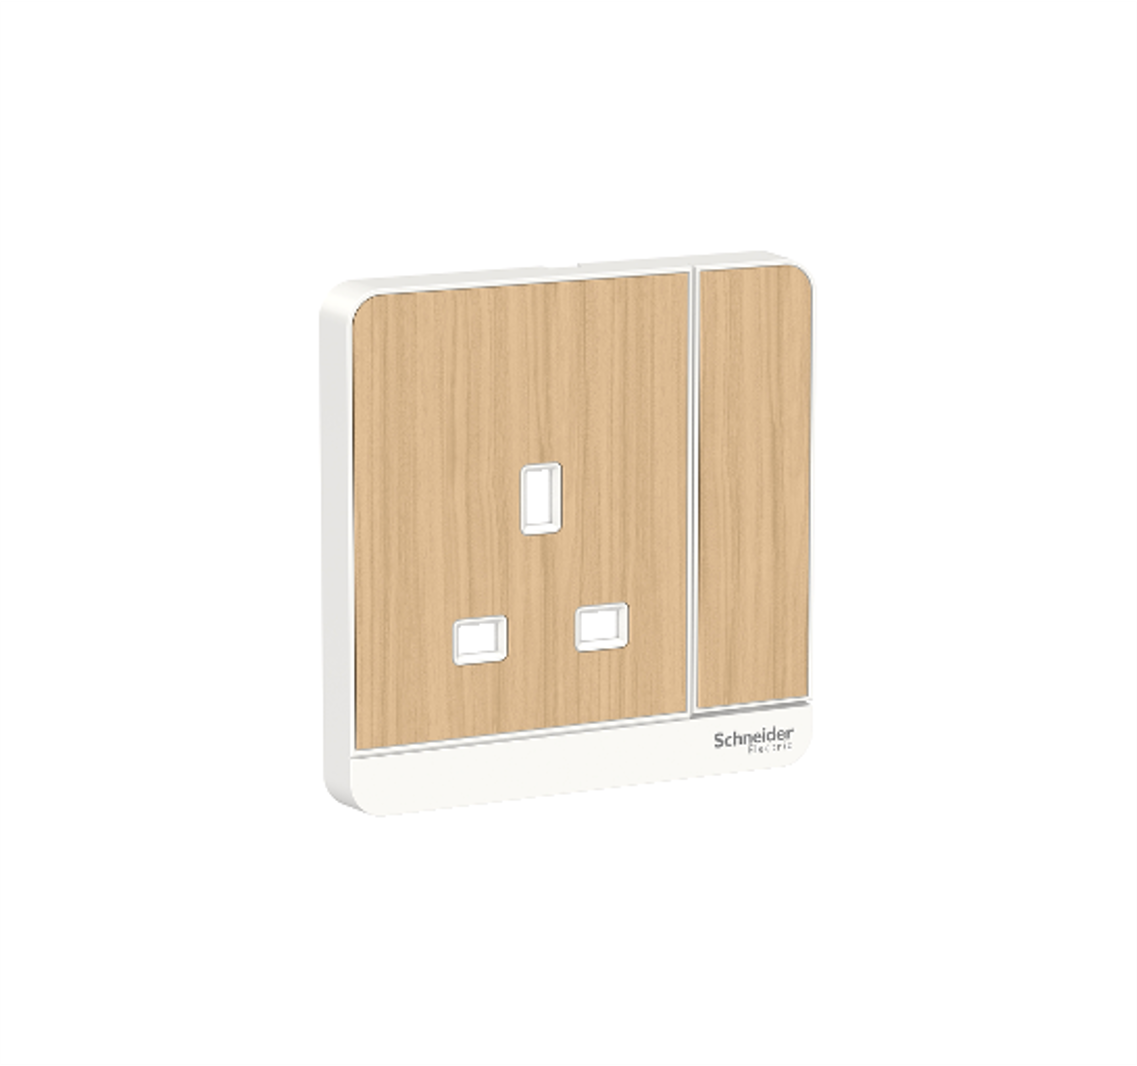 AvatarOn - 13A 1 Gang Switched Socket Cover (Light Wood)